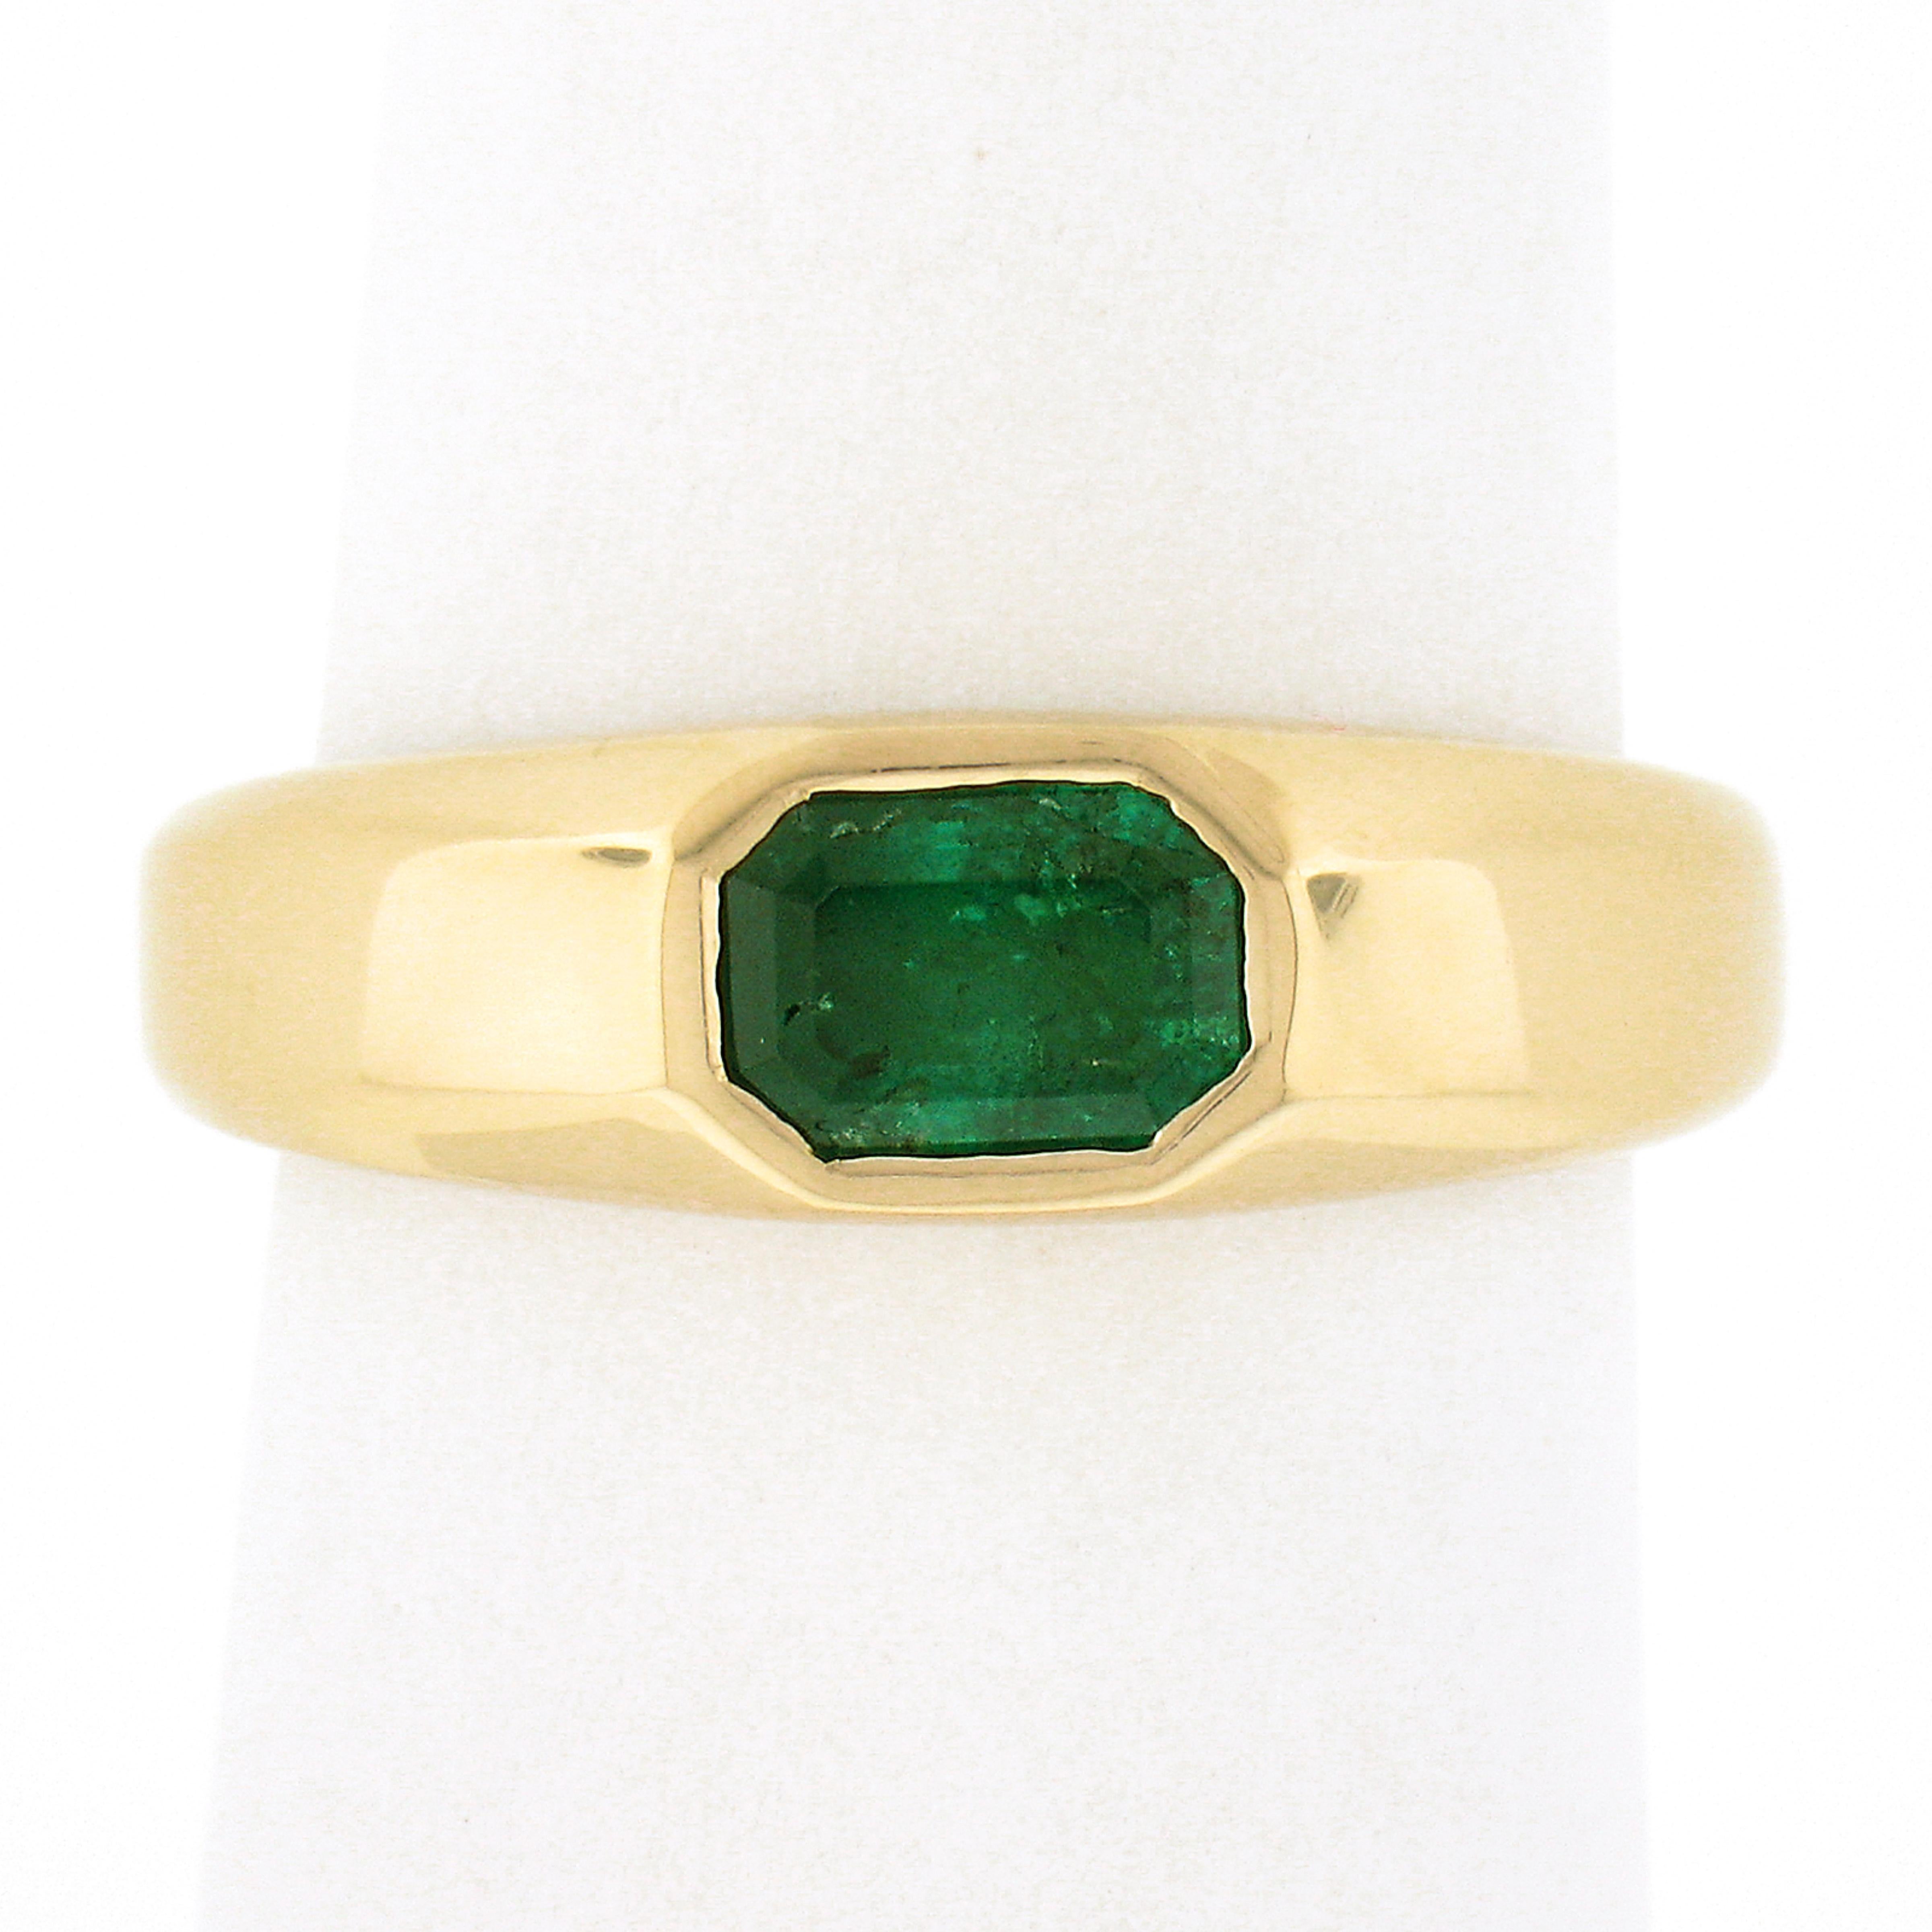 Here we have a simple, yet absolutely gorgeous, emerald solitaire ring that is newly crafted from solid 14k yellow gold. The solitaire is elongated emerald cut and is neatly bezel set sideways at the center of the ring, This well-made and super